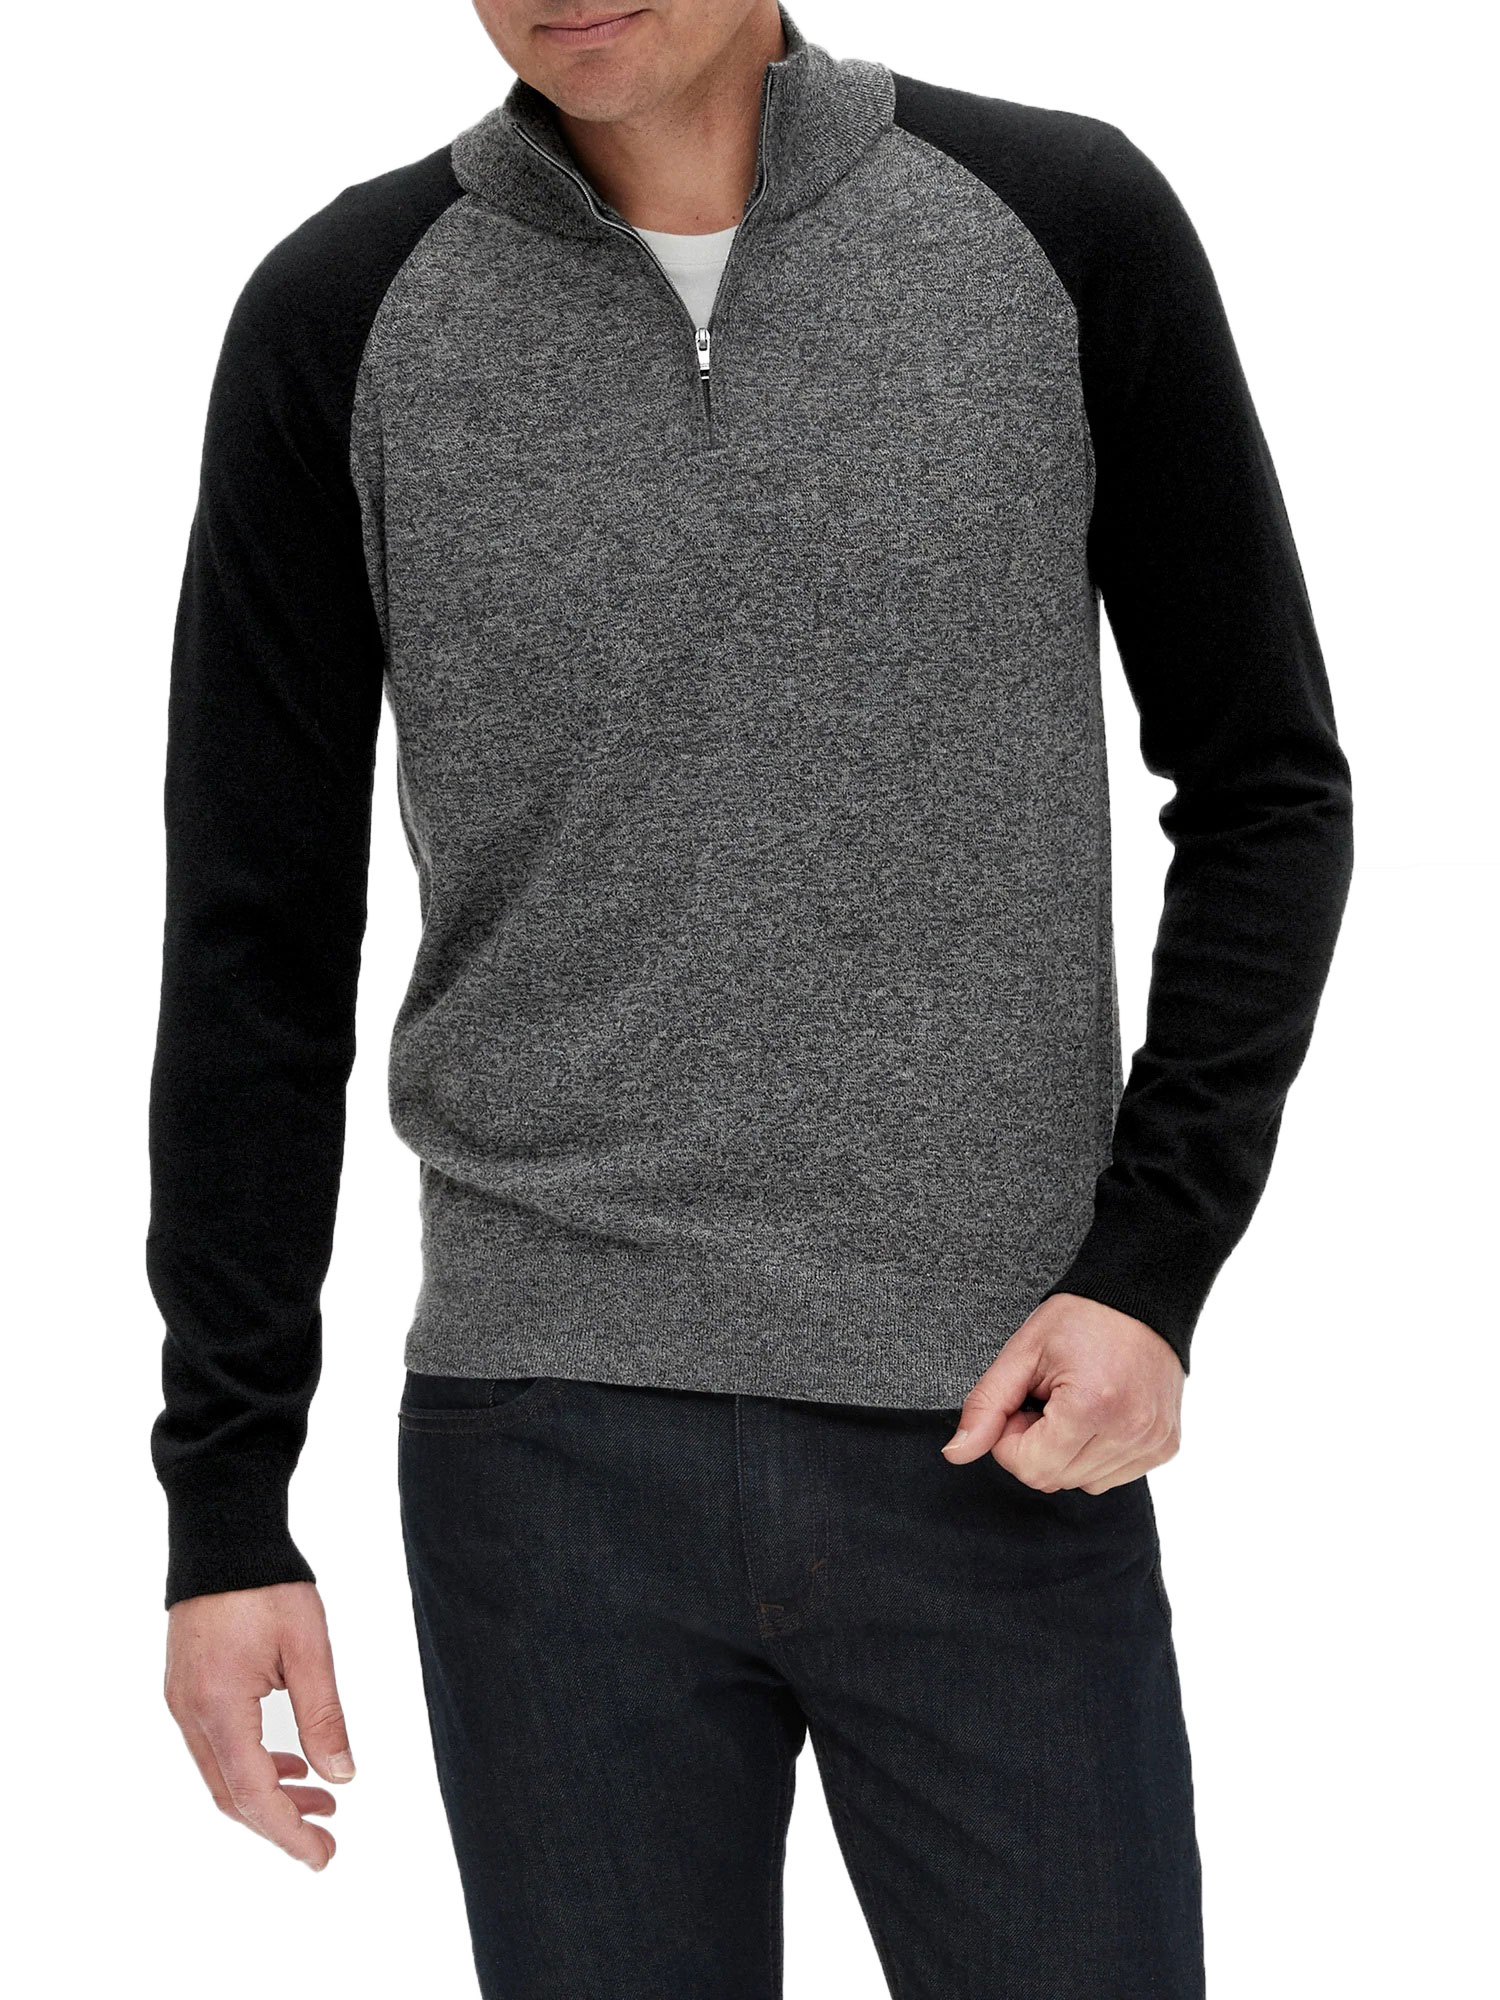 Mens Sweater Charcoal Grey